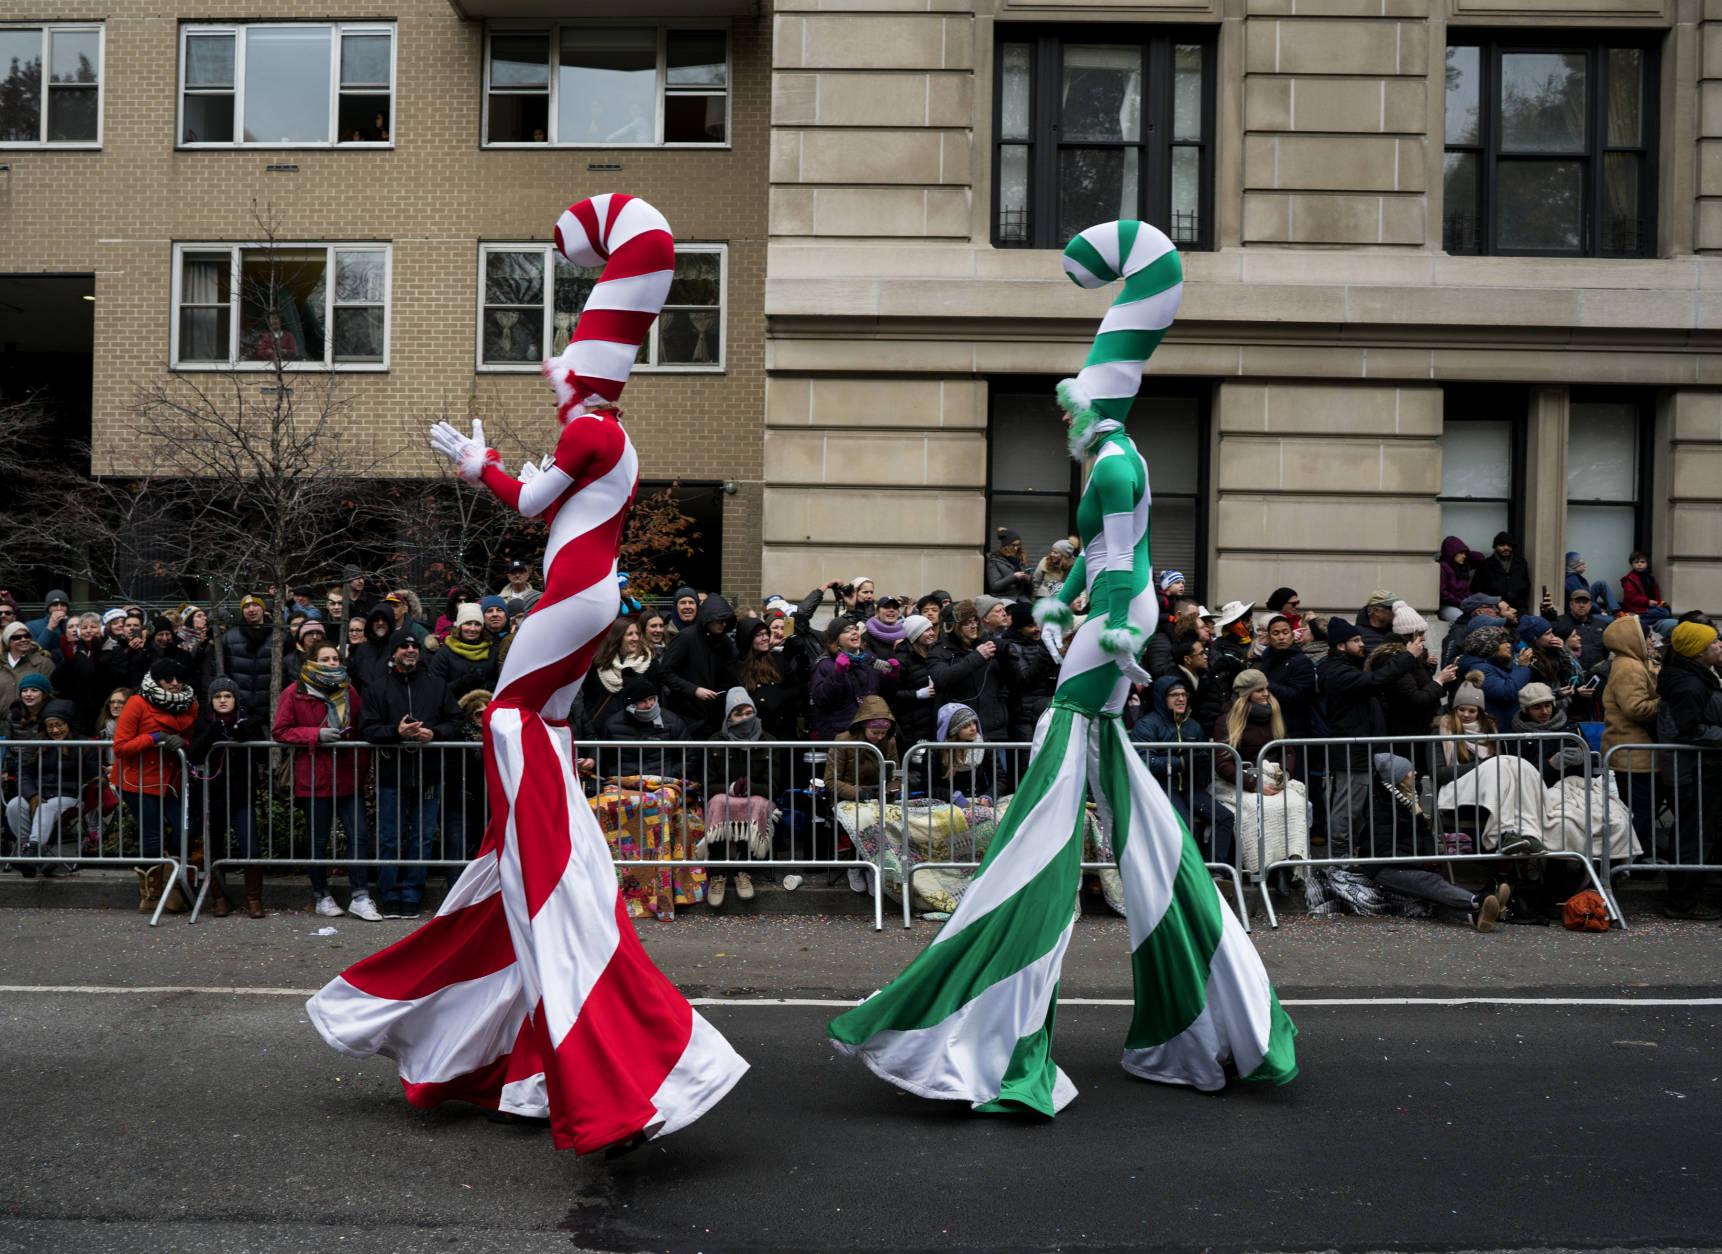 Participants stand tall above spectators along Central Park West during the Macy's Thanksgiving Day Parade in New York Thursday, Nov. 24, 2016. (AP Photo/Craig Ruttle)